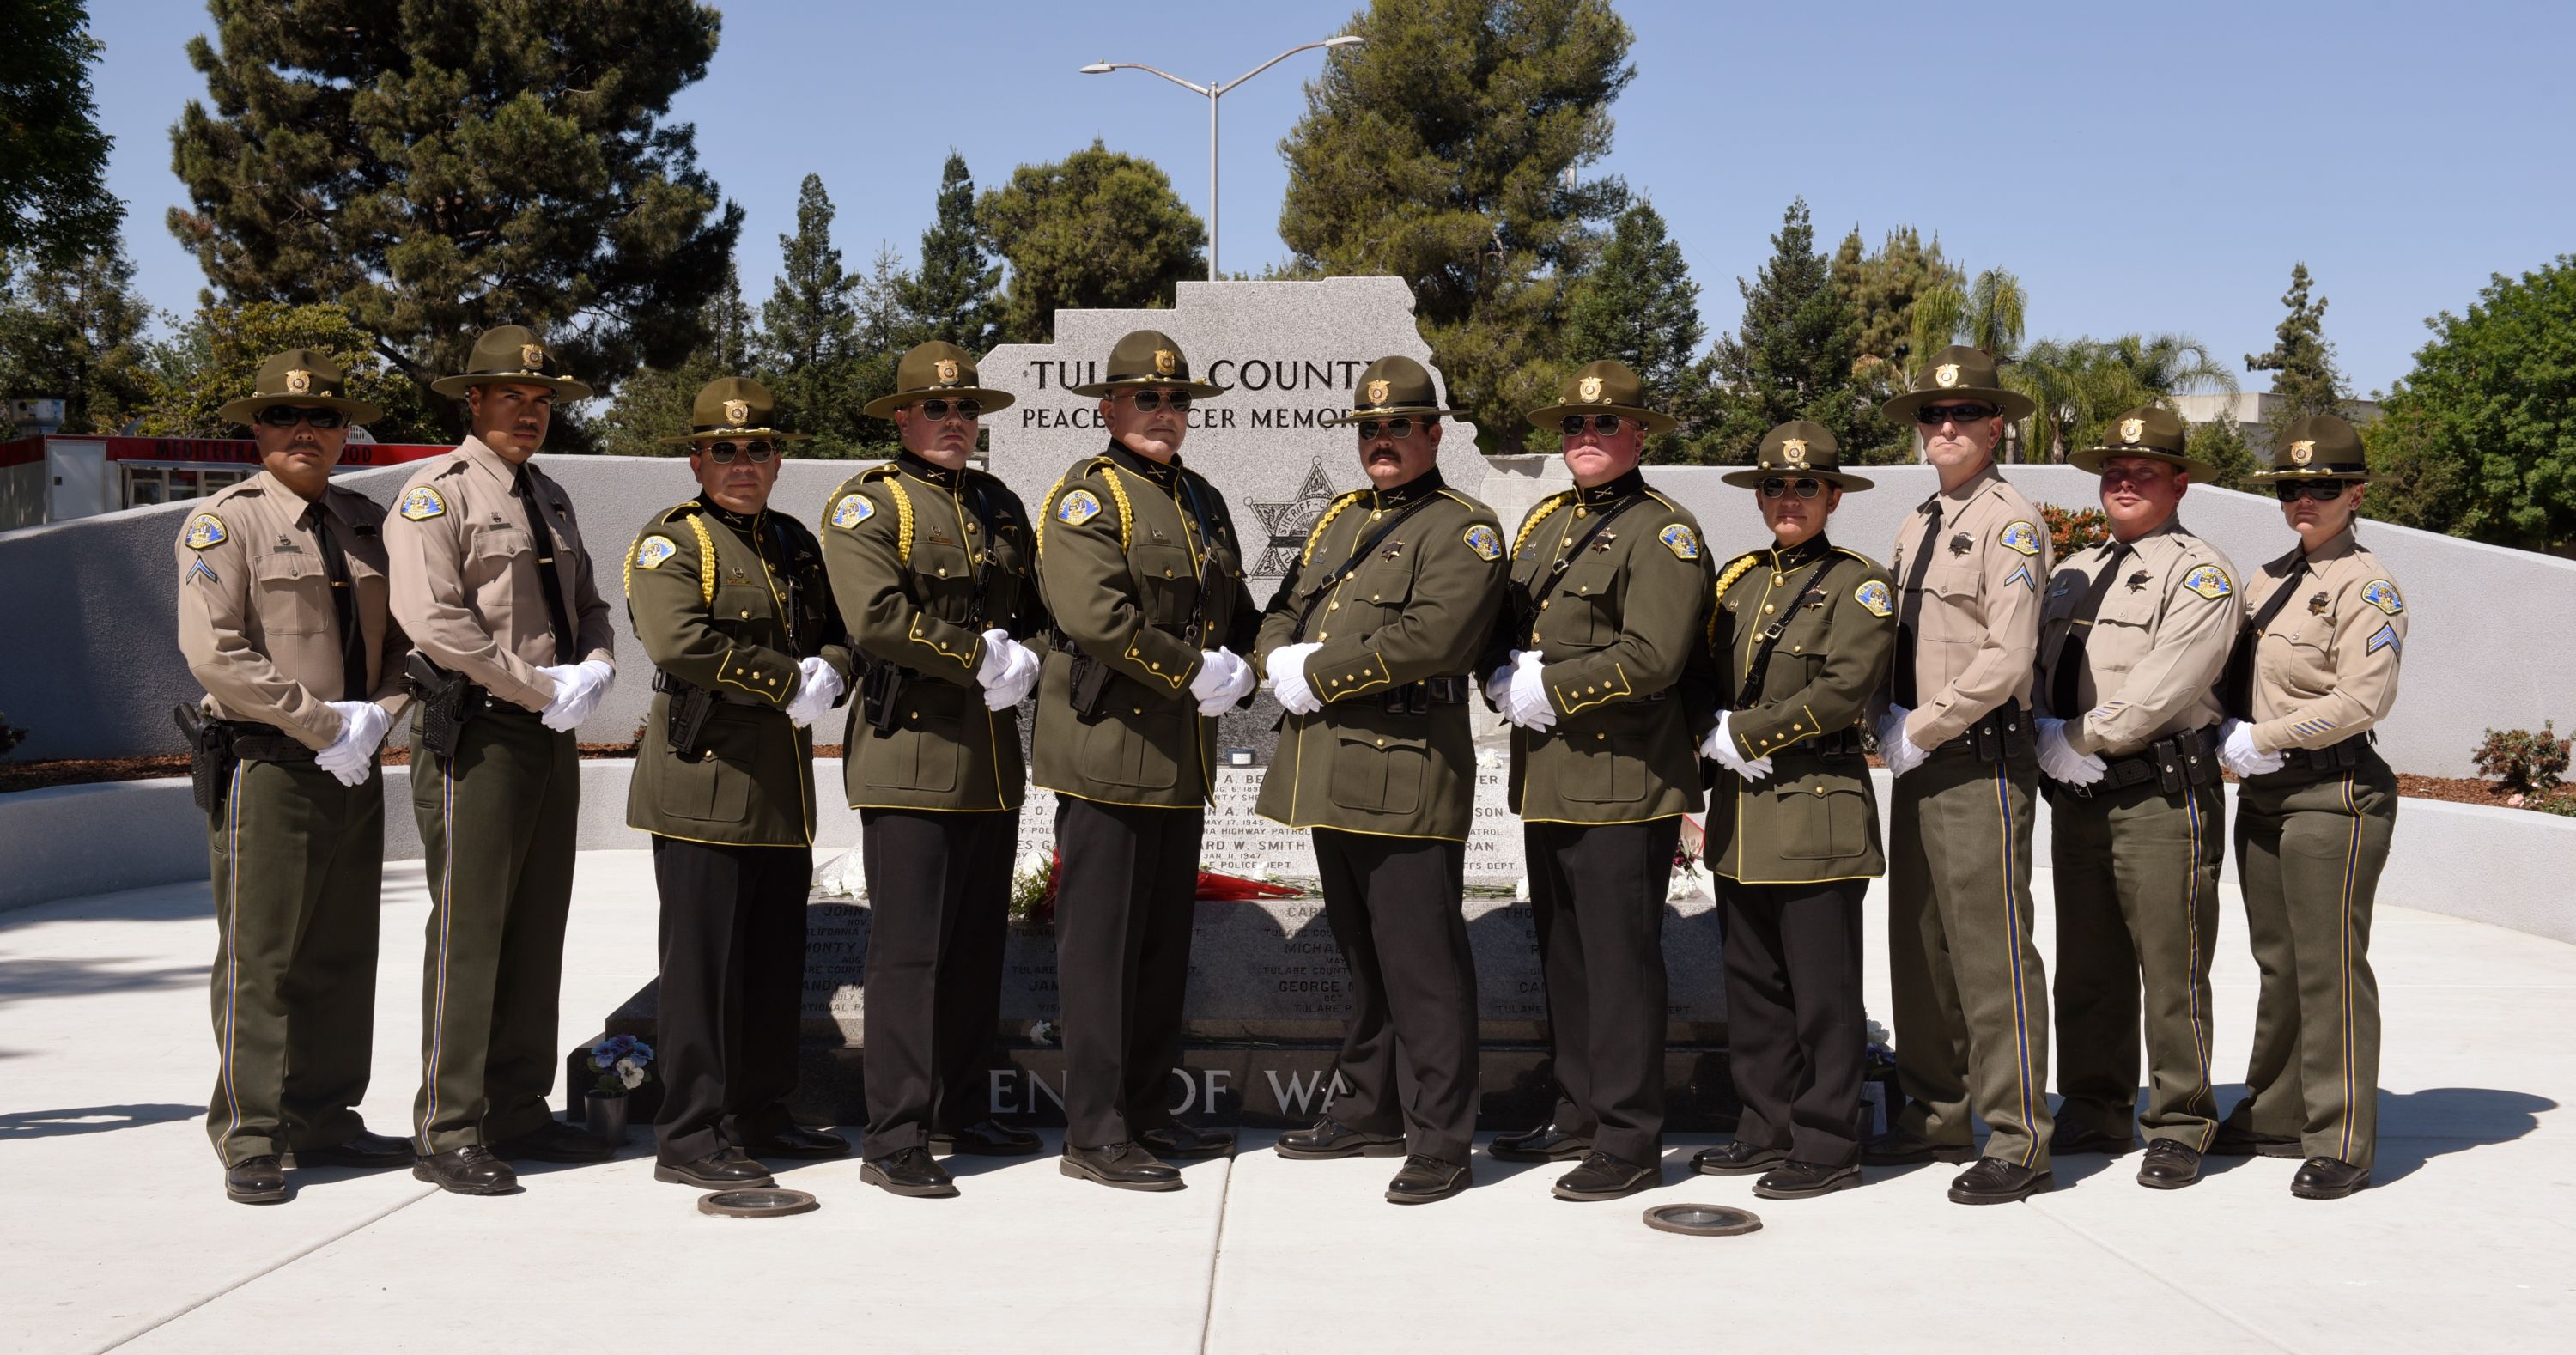 Eleven members of the Sheriff's Honor Guard stand in a line in front of the Peace Officer Memorial and pose for the portrait.